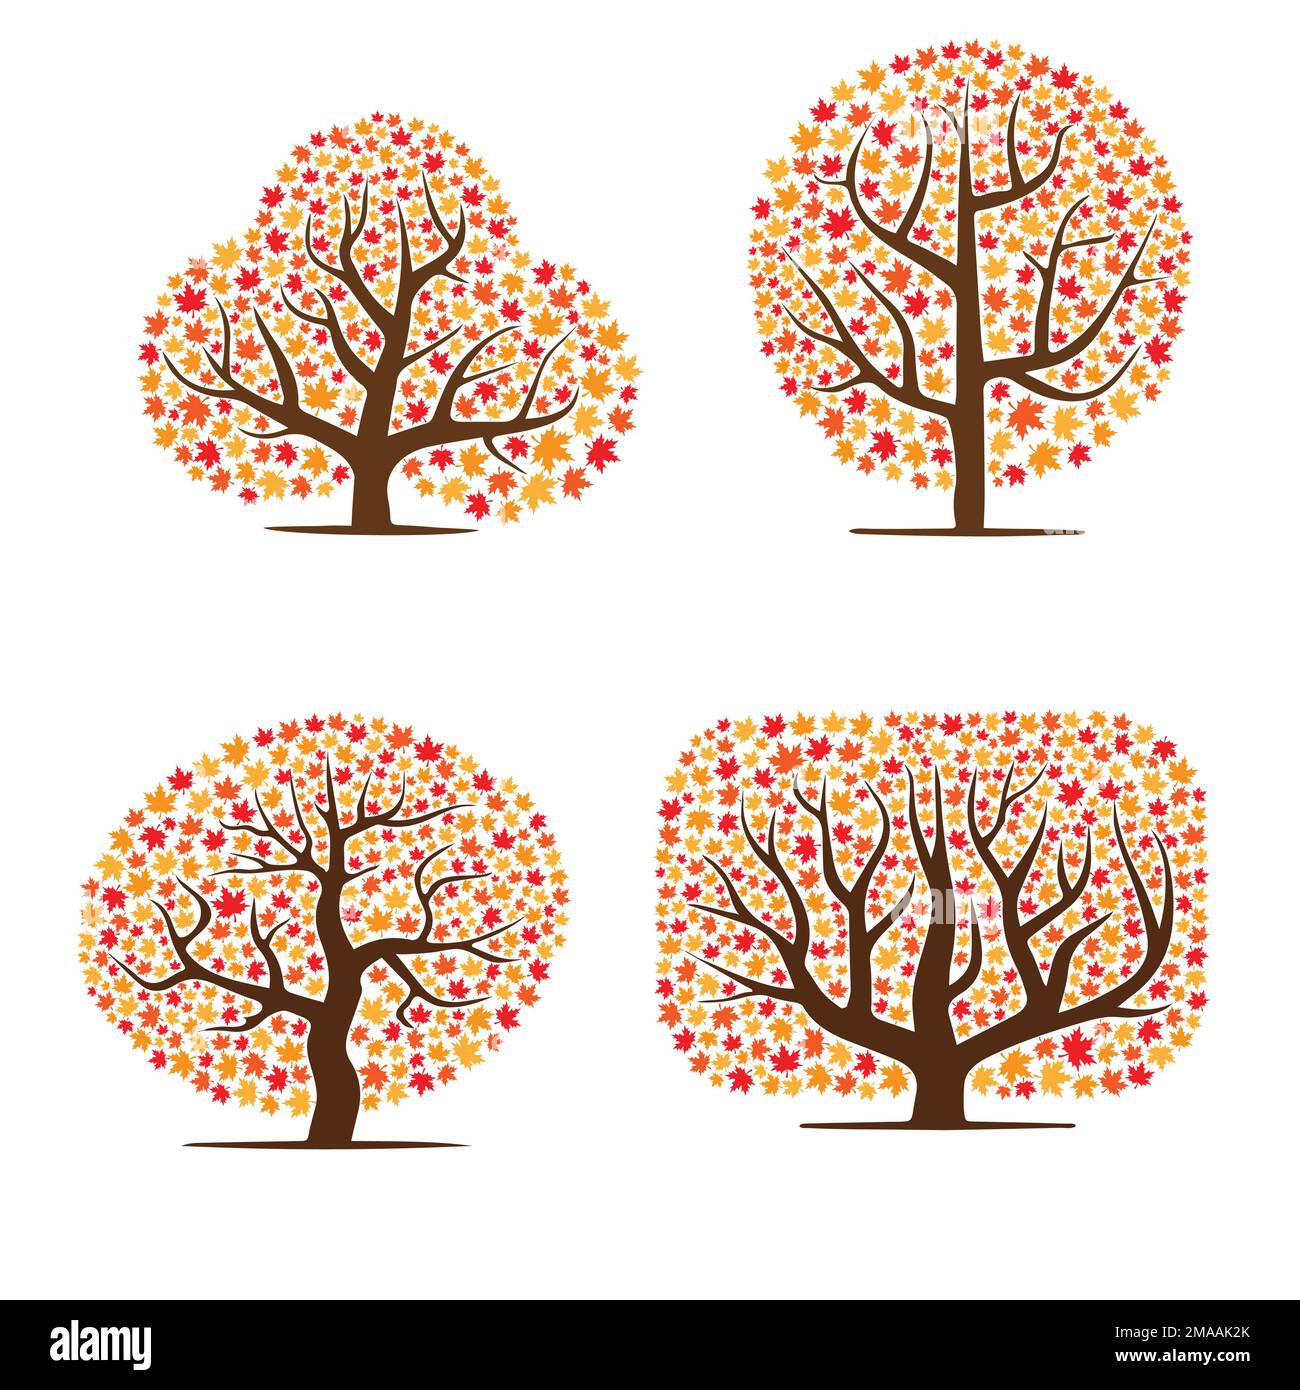 Abstract maple leaves orange tree silhouettes set Stock Vector